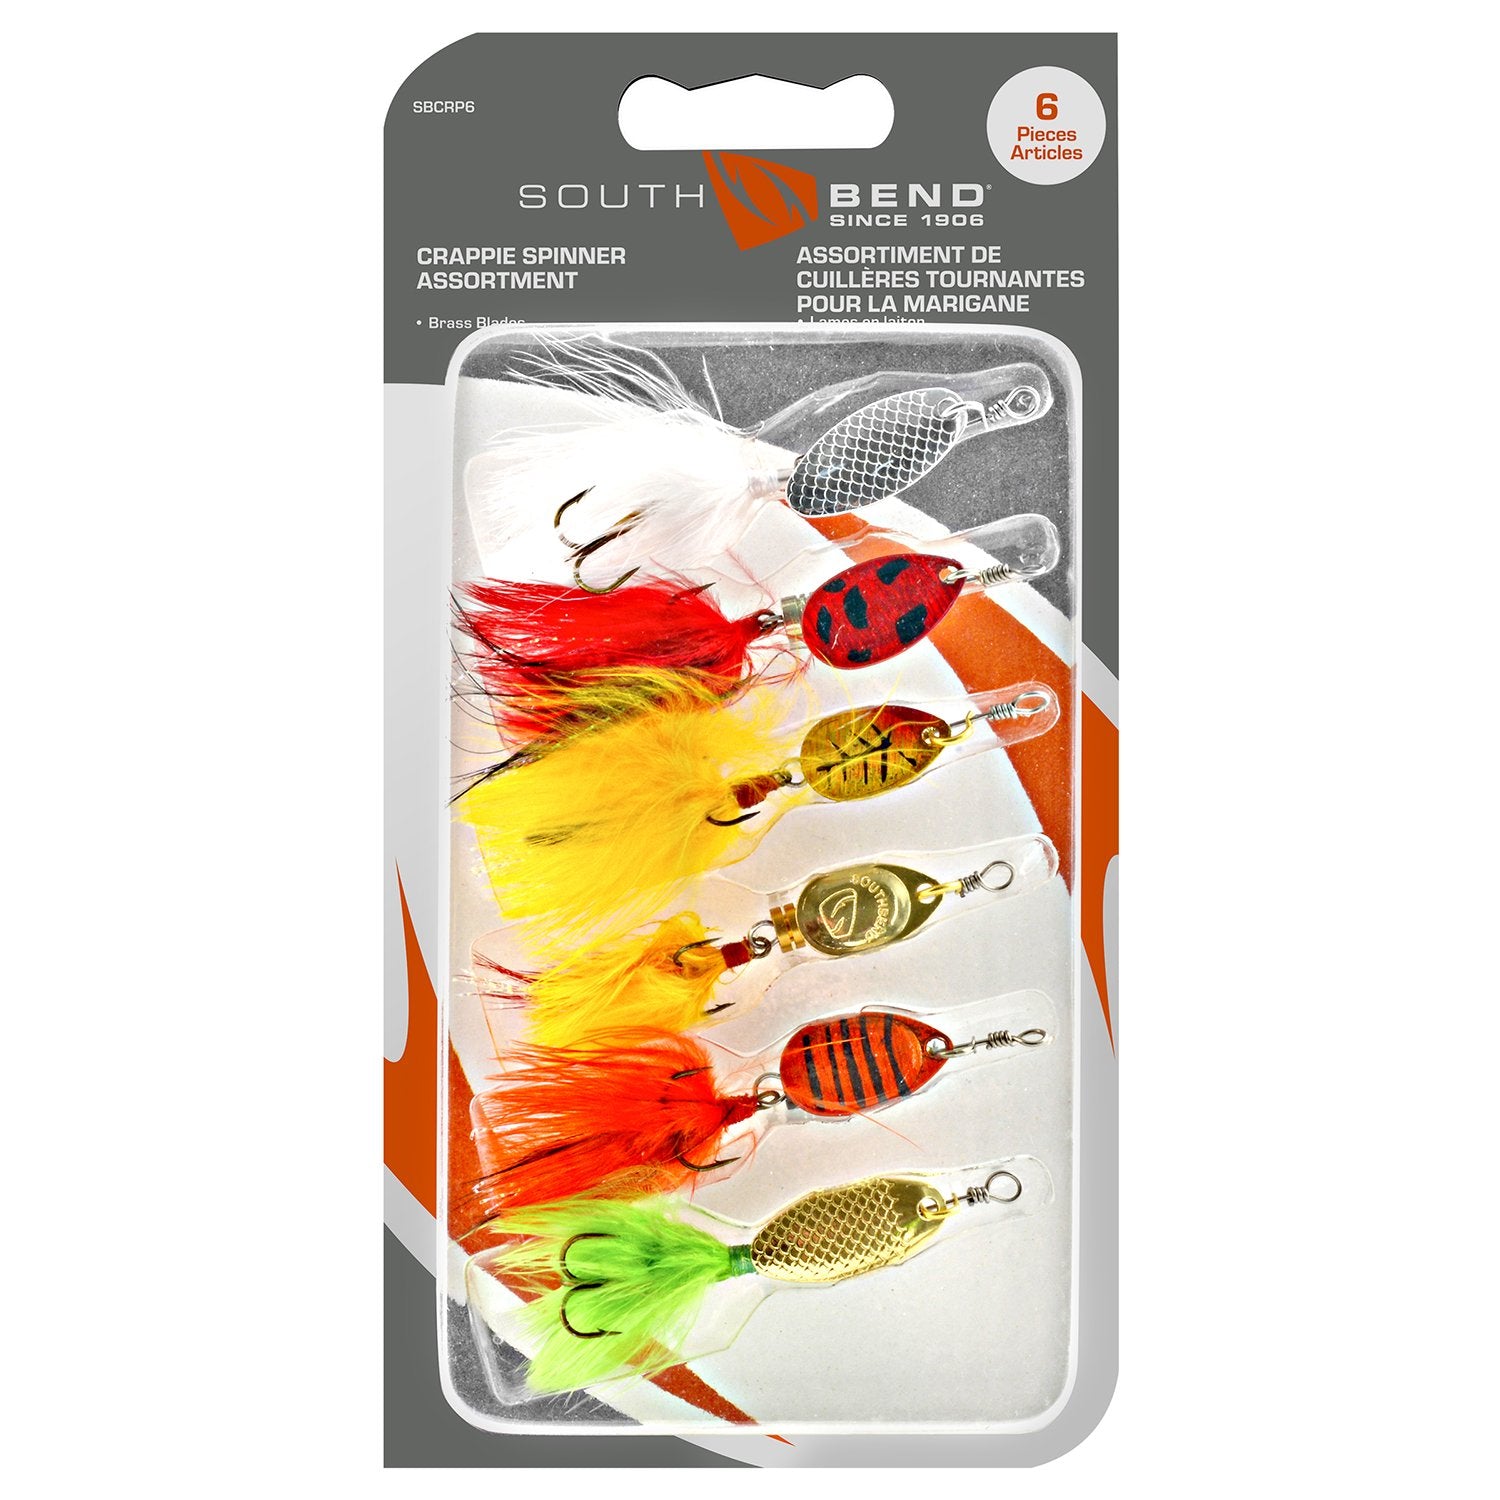 South Bend Crappie Spinner Assortment, 6-Pack